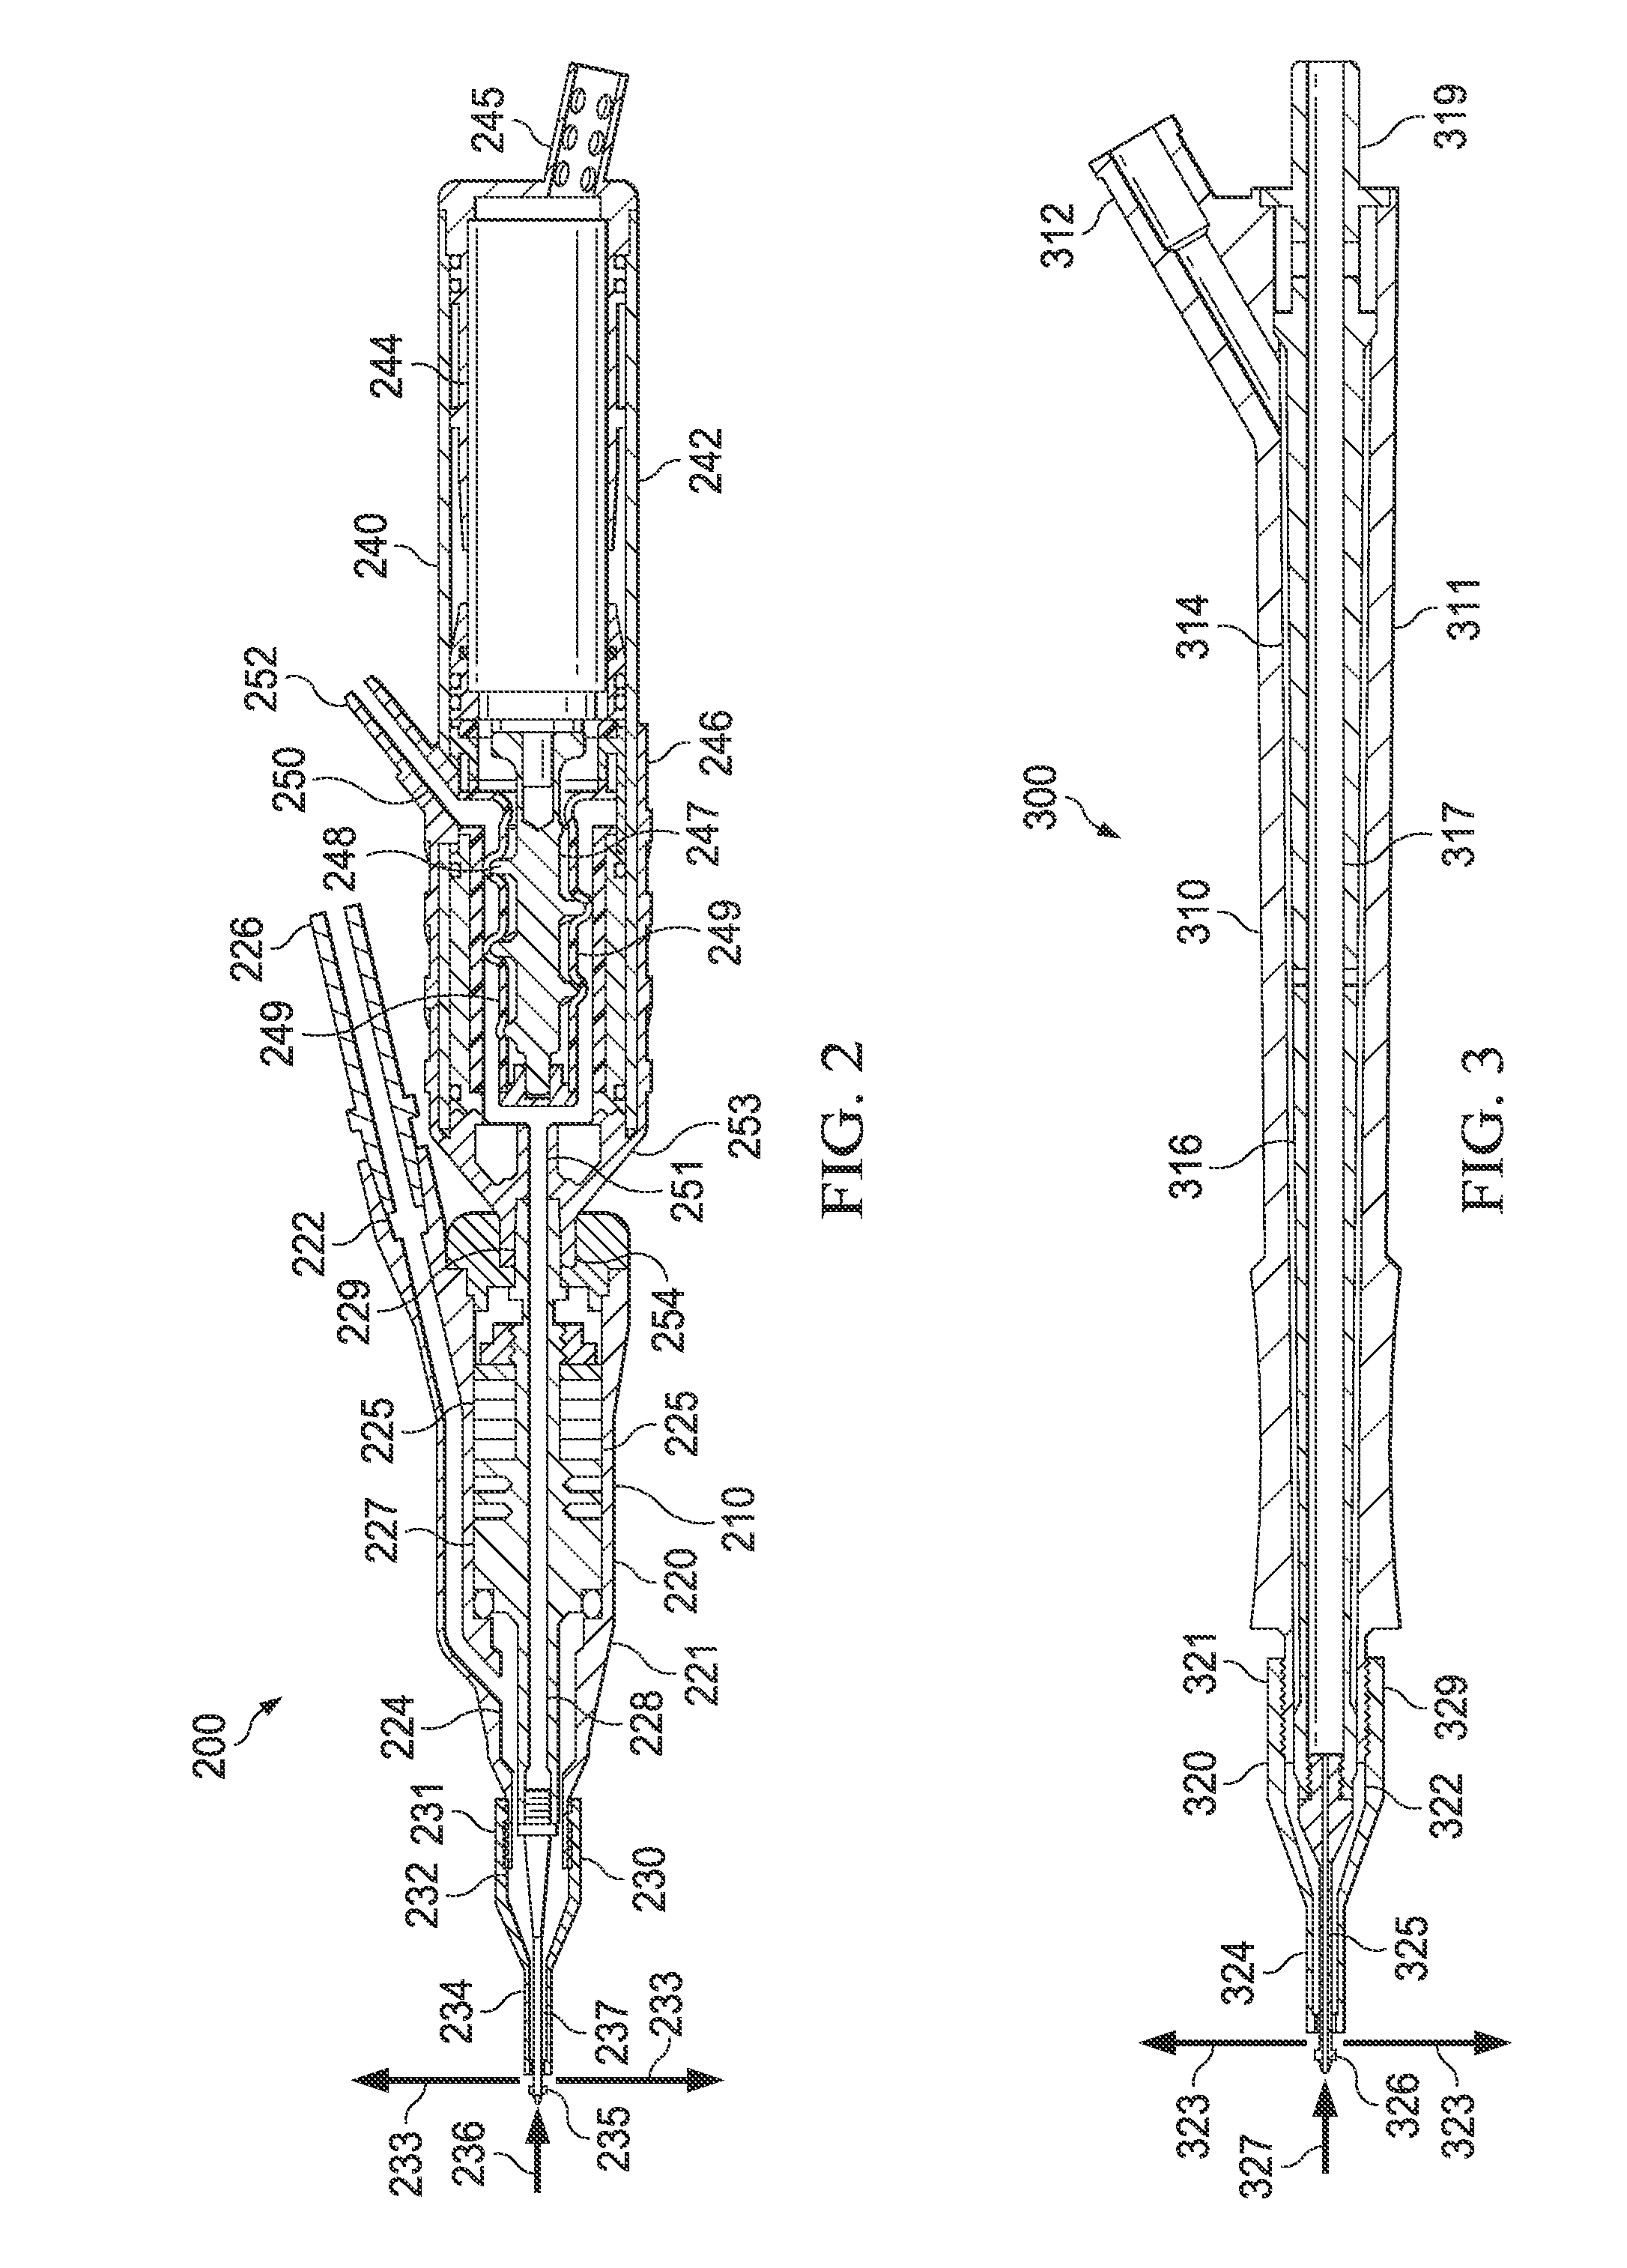 Systems and methods for ocular surgery